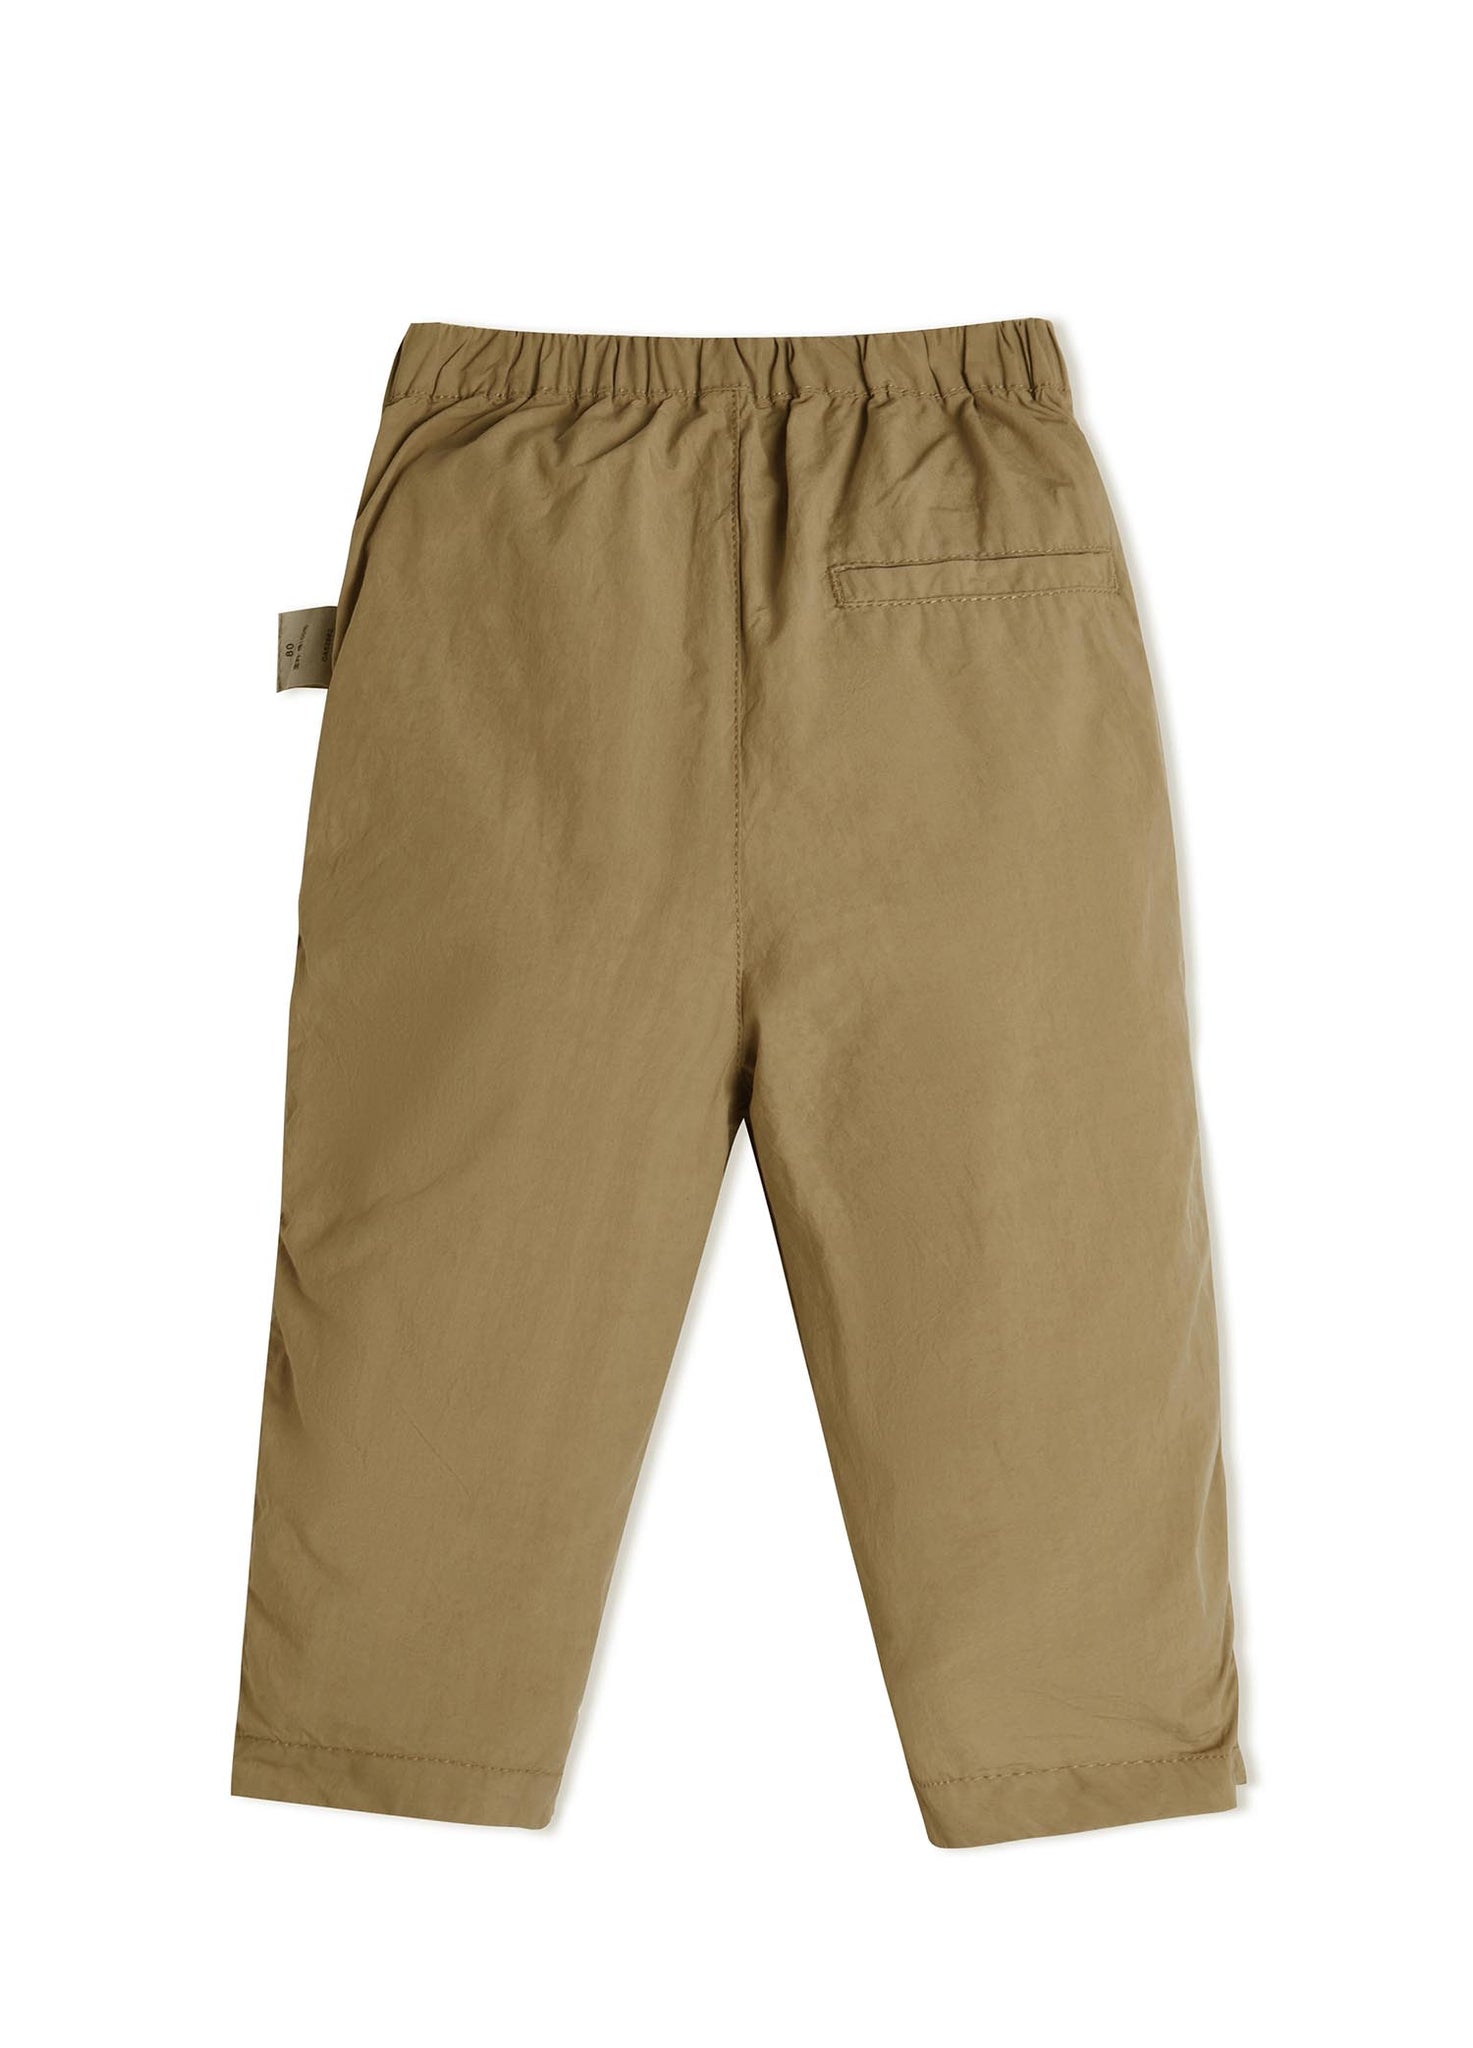 Pants / jnby for mini Wrinkled Cotton Pants